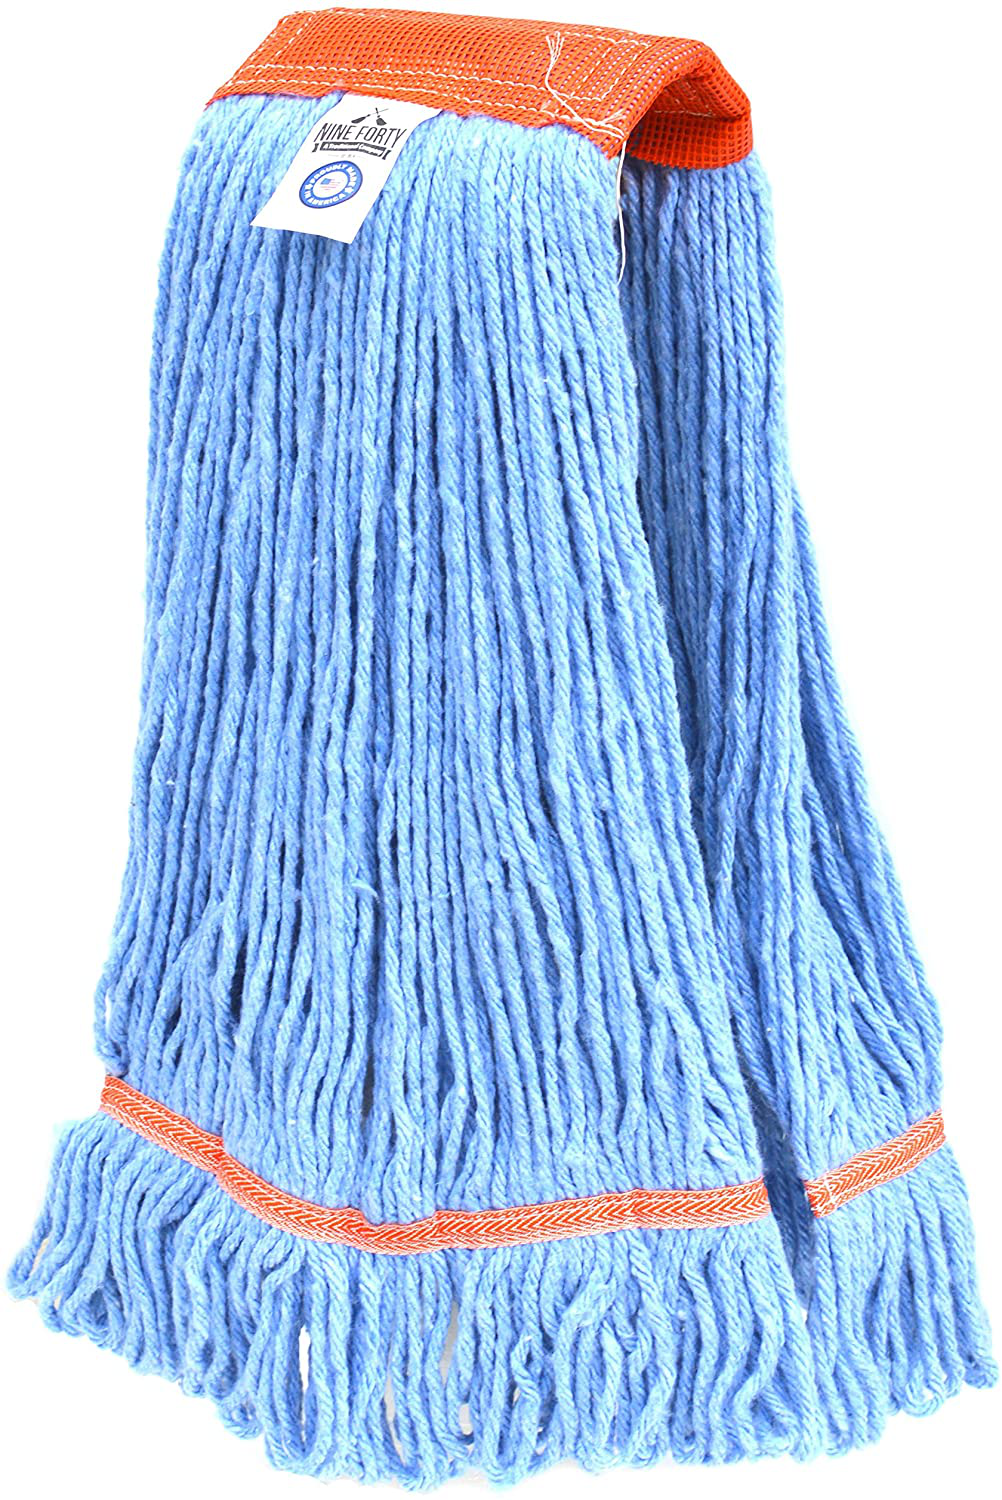 NINE FORTY USA Floor Cleaning Wet Mop Head Refill | Replacement – Janitorial Heavy Duty Industrial | Commercial Yarn (1 Pack, Large)